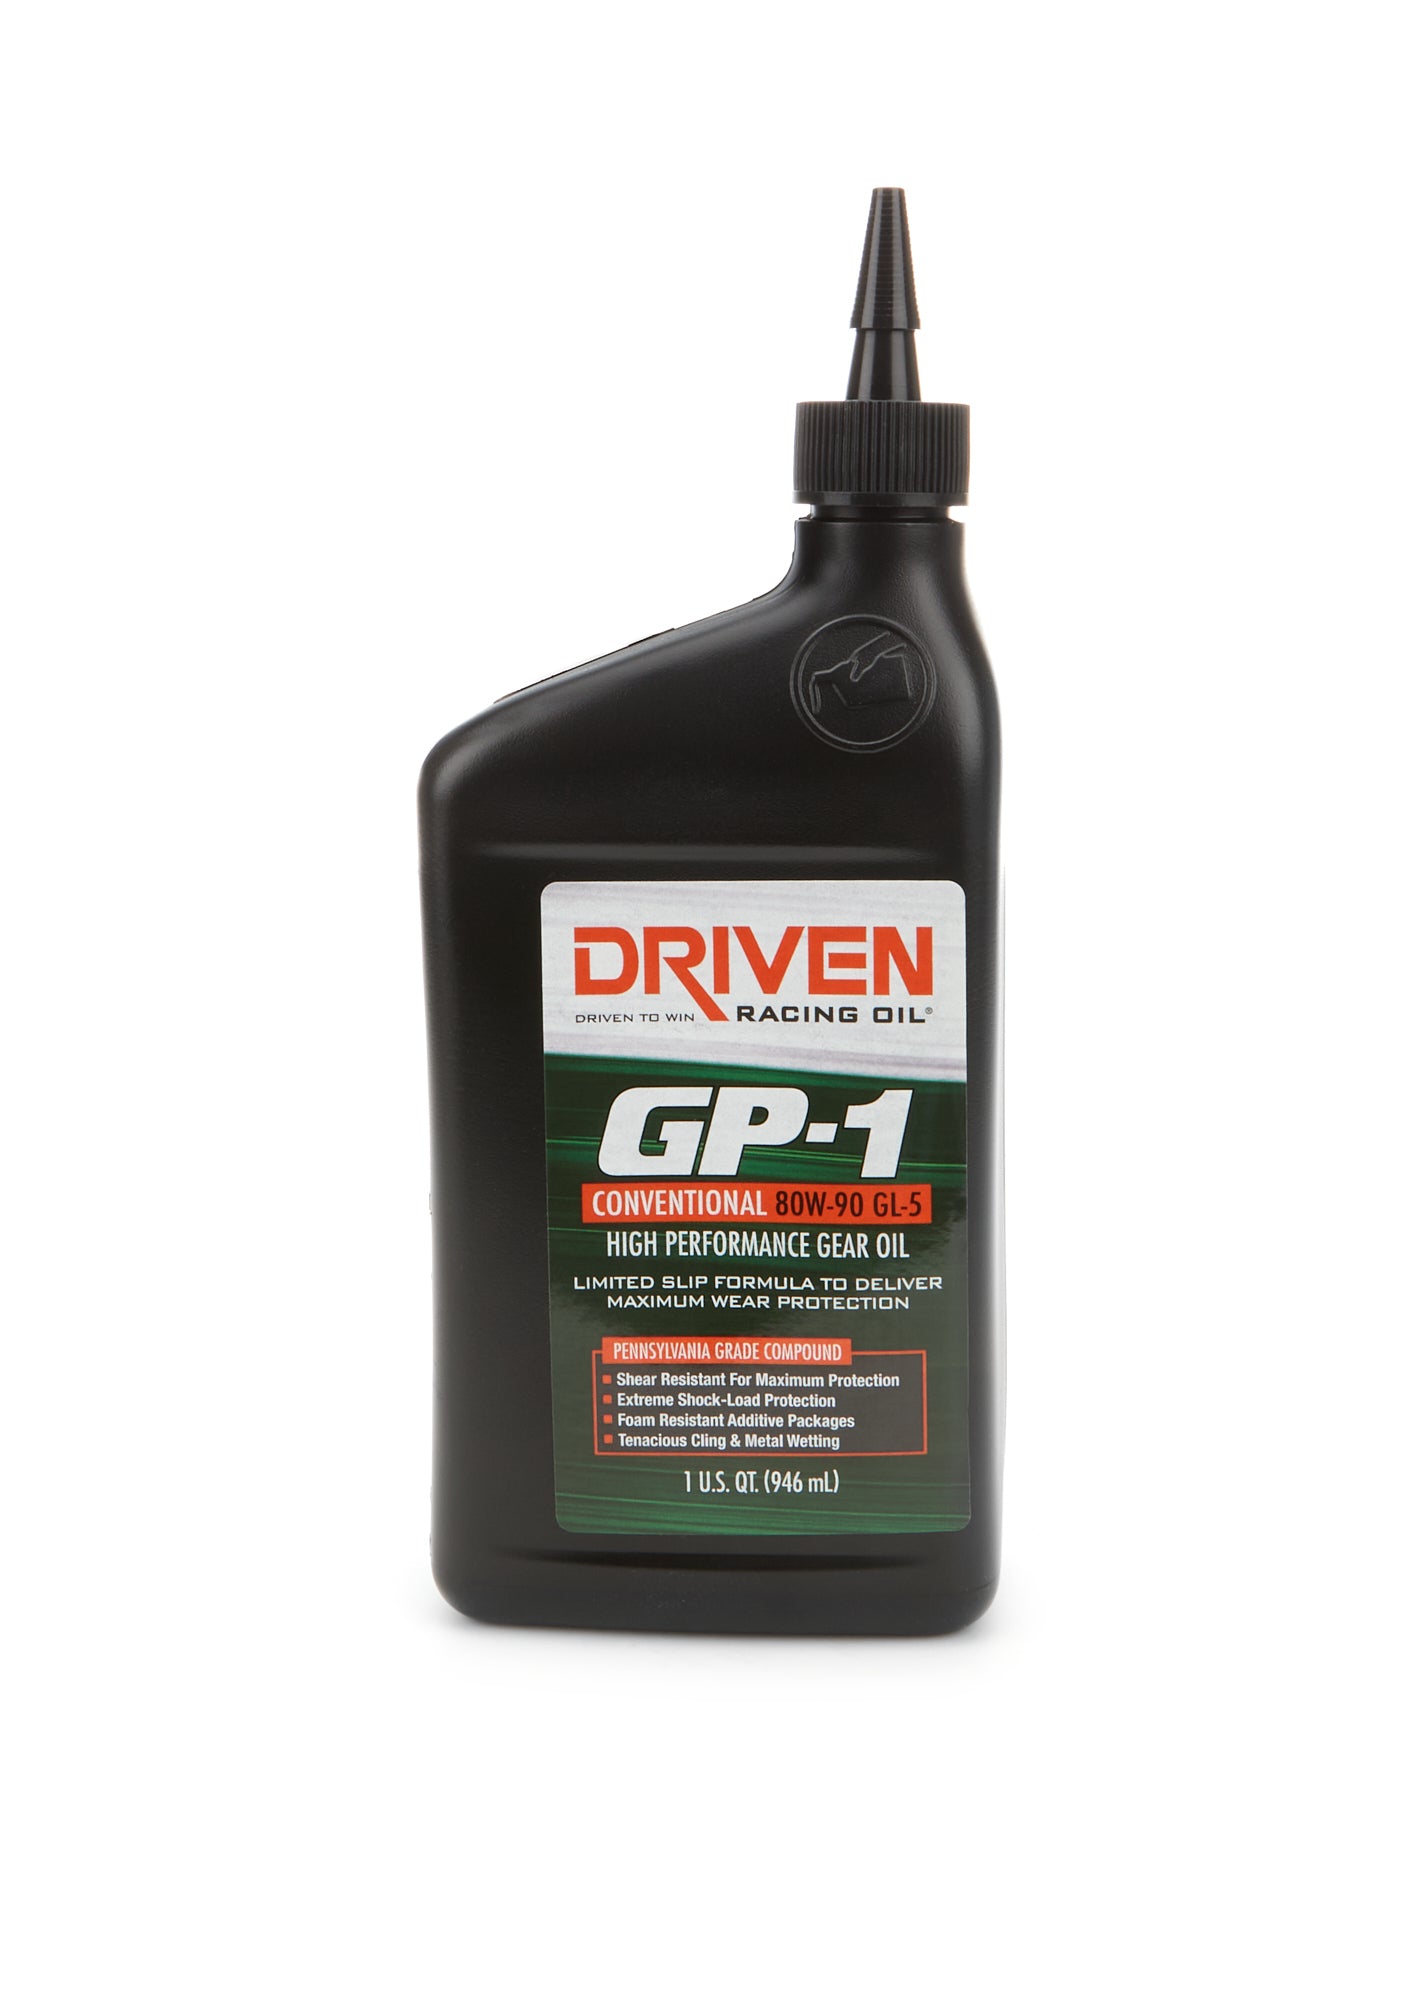 Driven Racing Oil GP-1 Conventional 80W90 GL5 Gear Oil 1 Quart Oils, Fluids and Additives Gear Oil main image